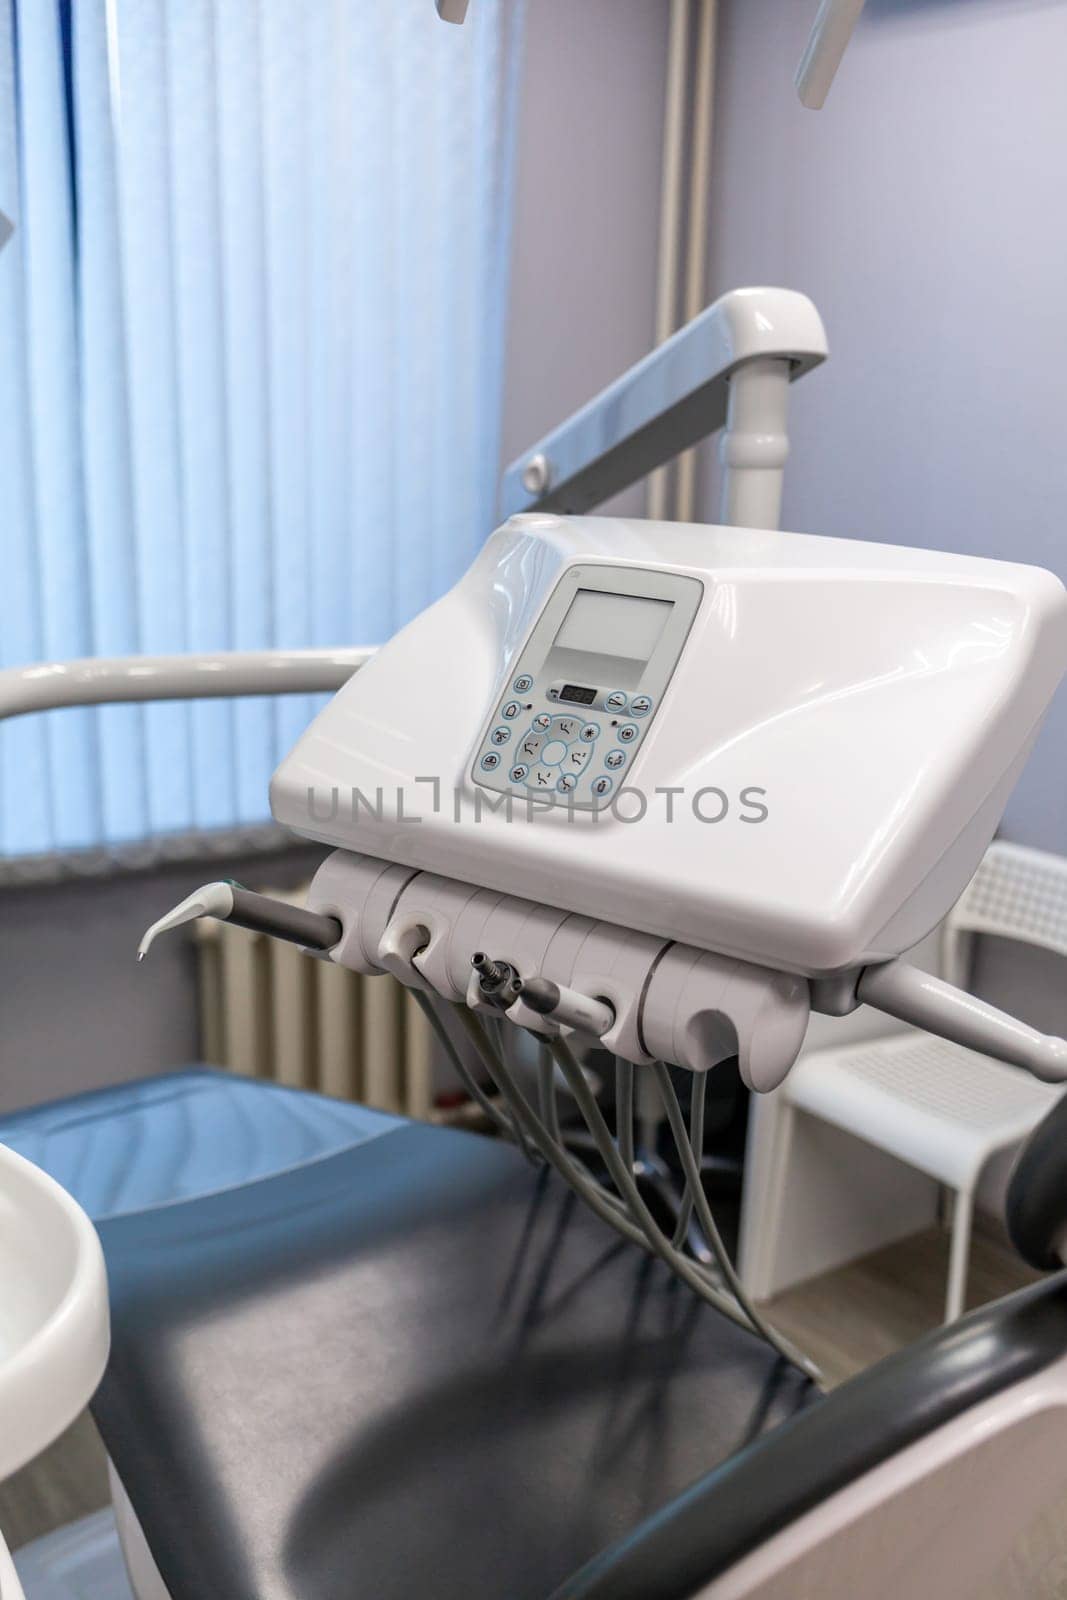 Dental interior office with modern equipment. Modern dental practice. Dental chair and other accessories used by dentists in blue, medic light